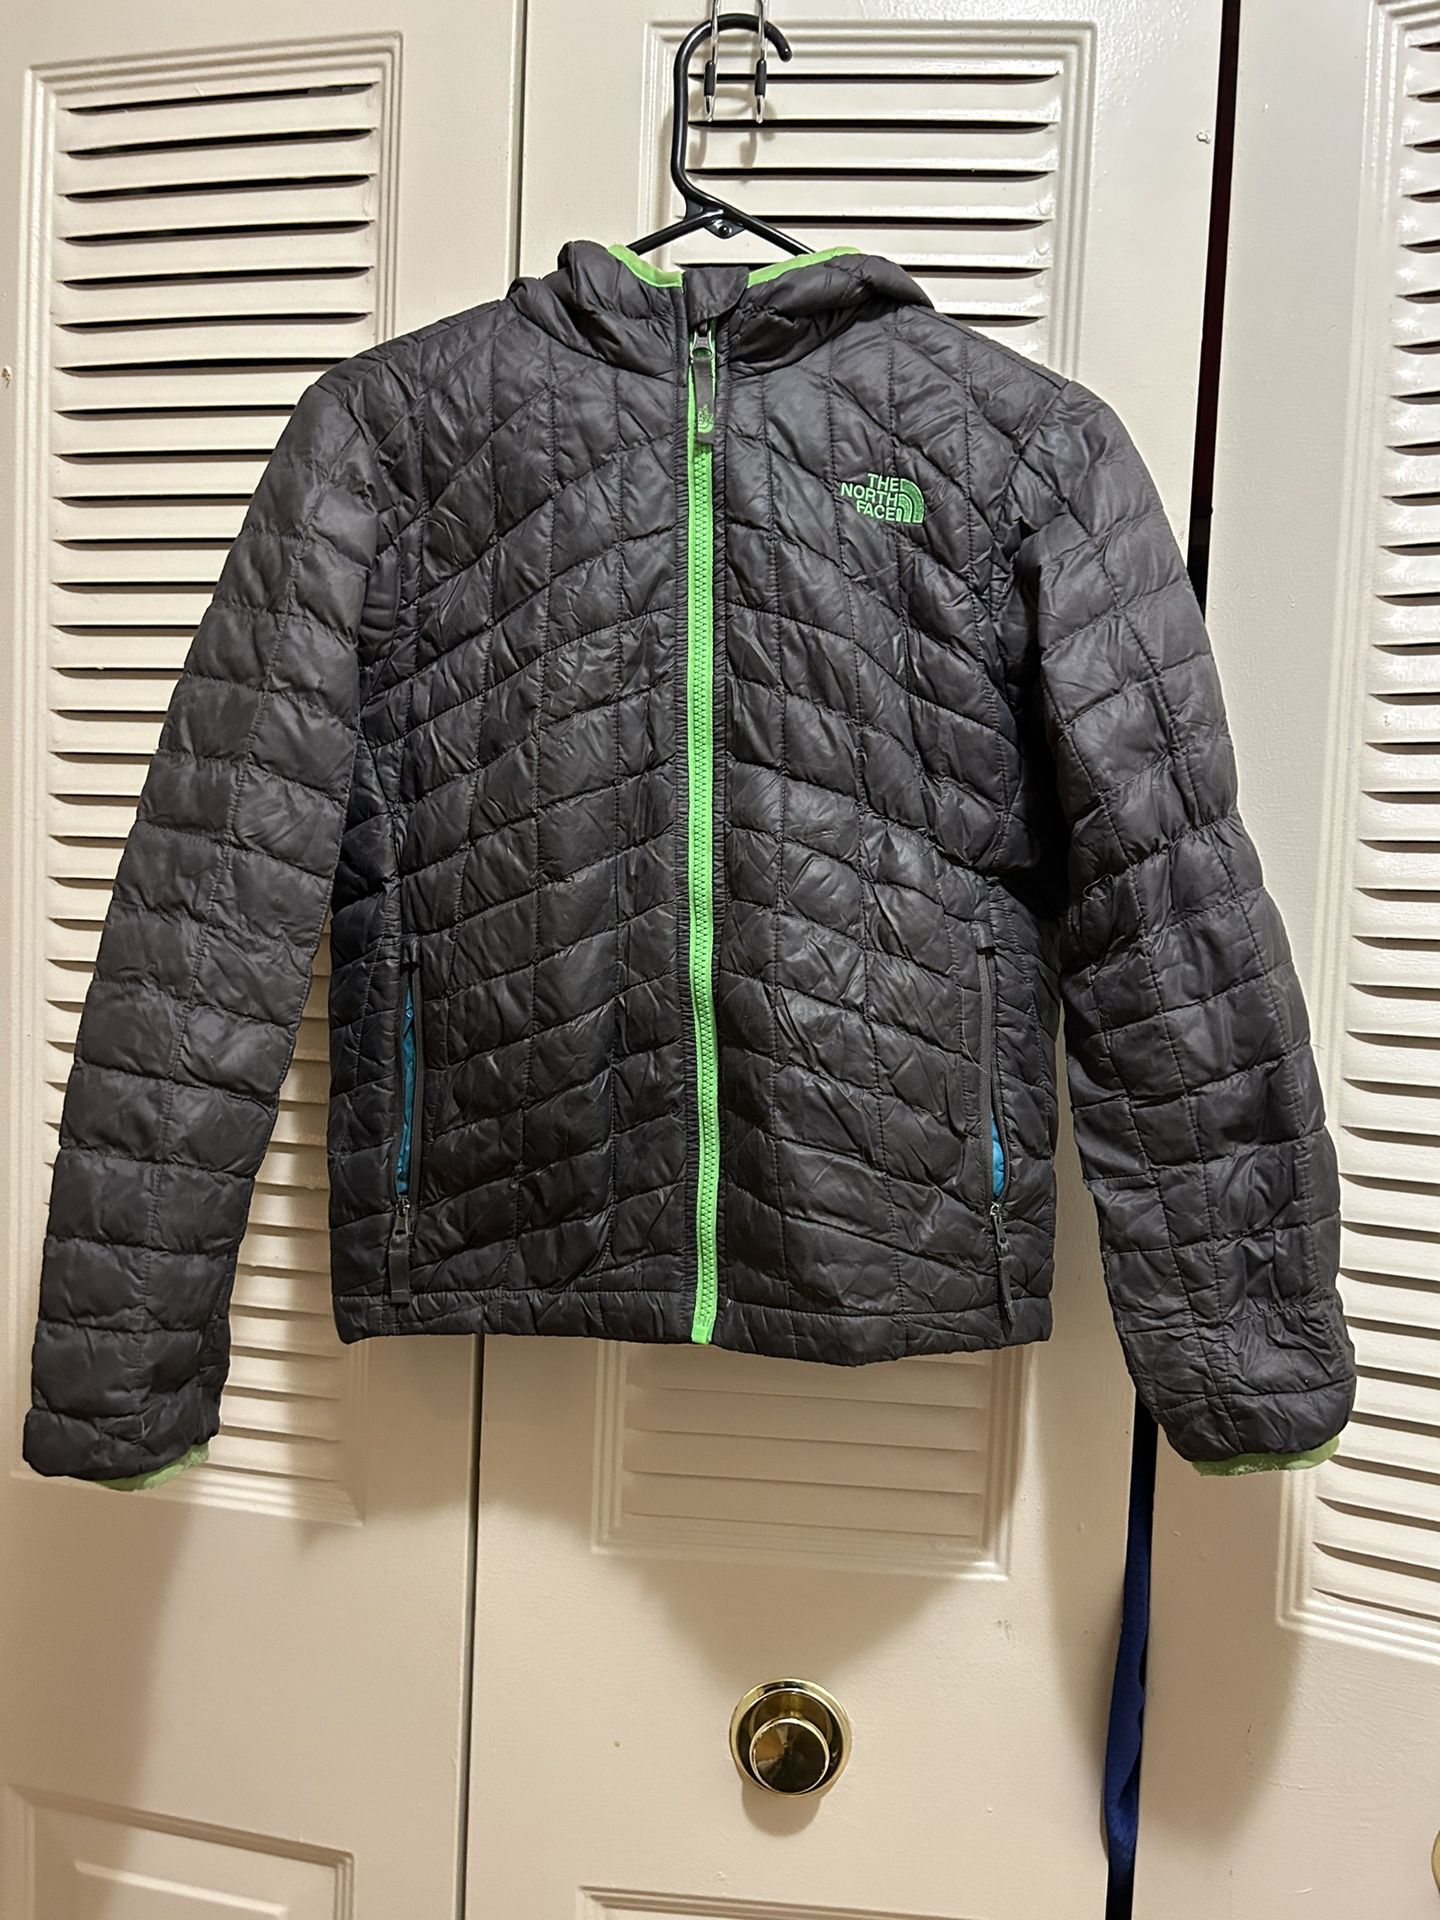 North Face Jacket’s